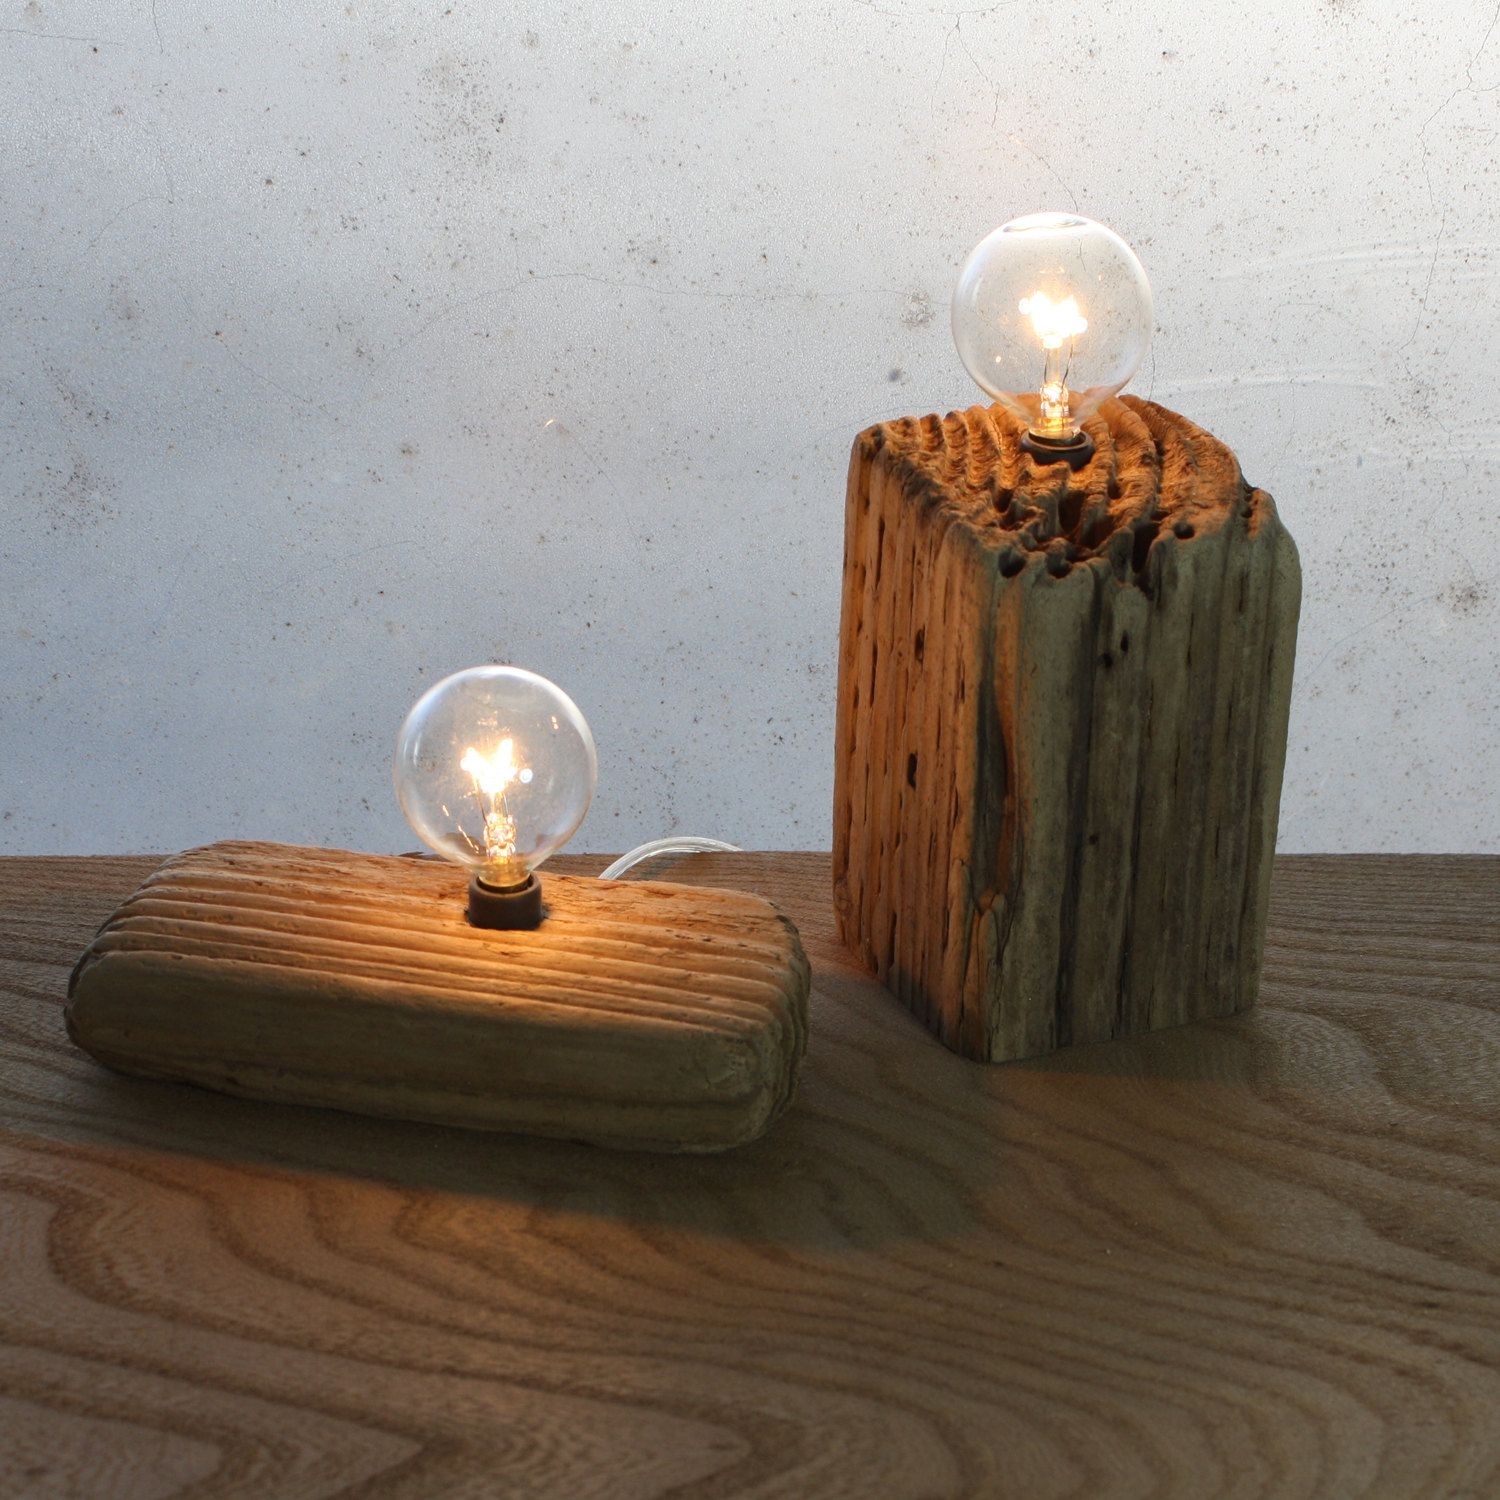 Each of these repurposed driftwood lamps is one of a